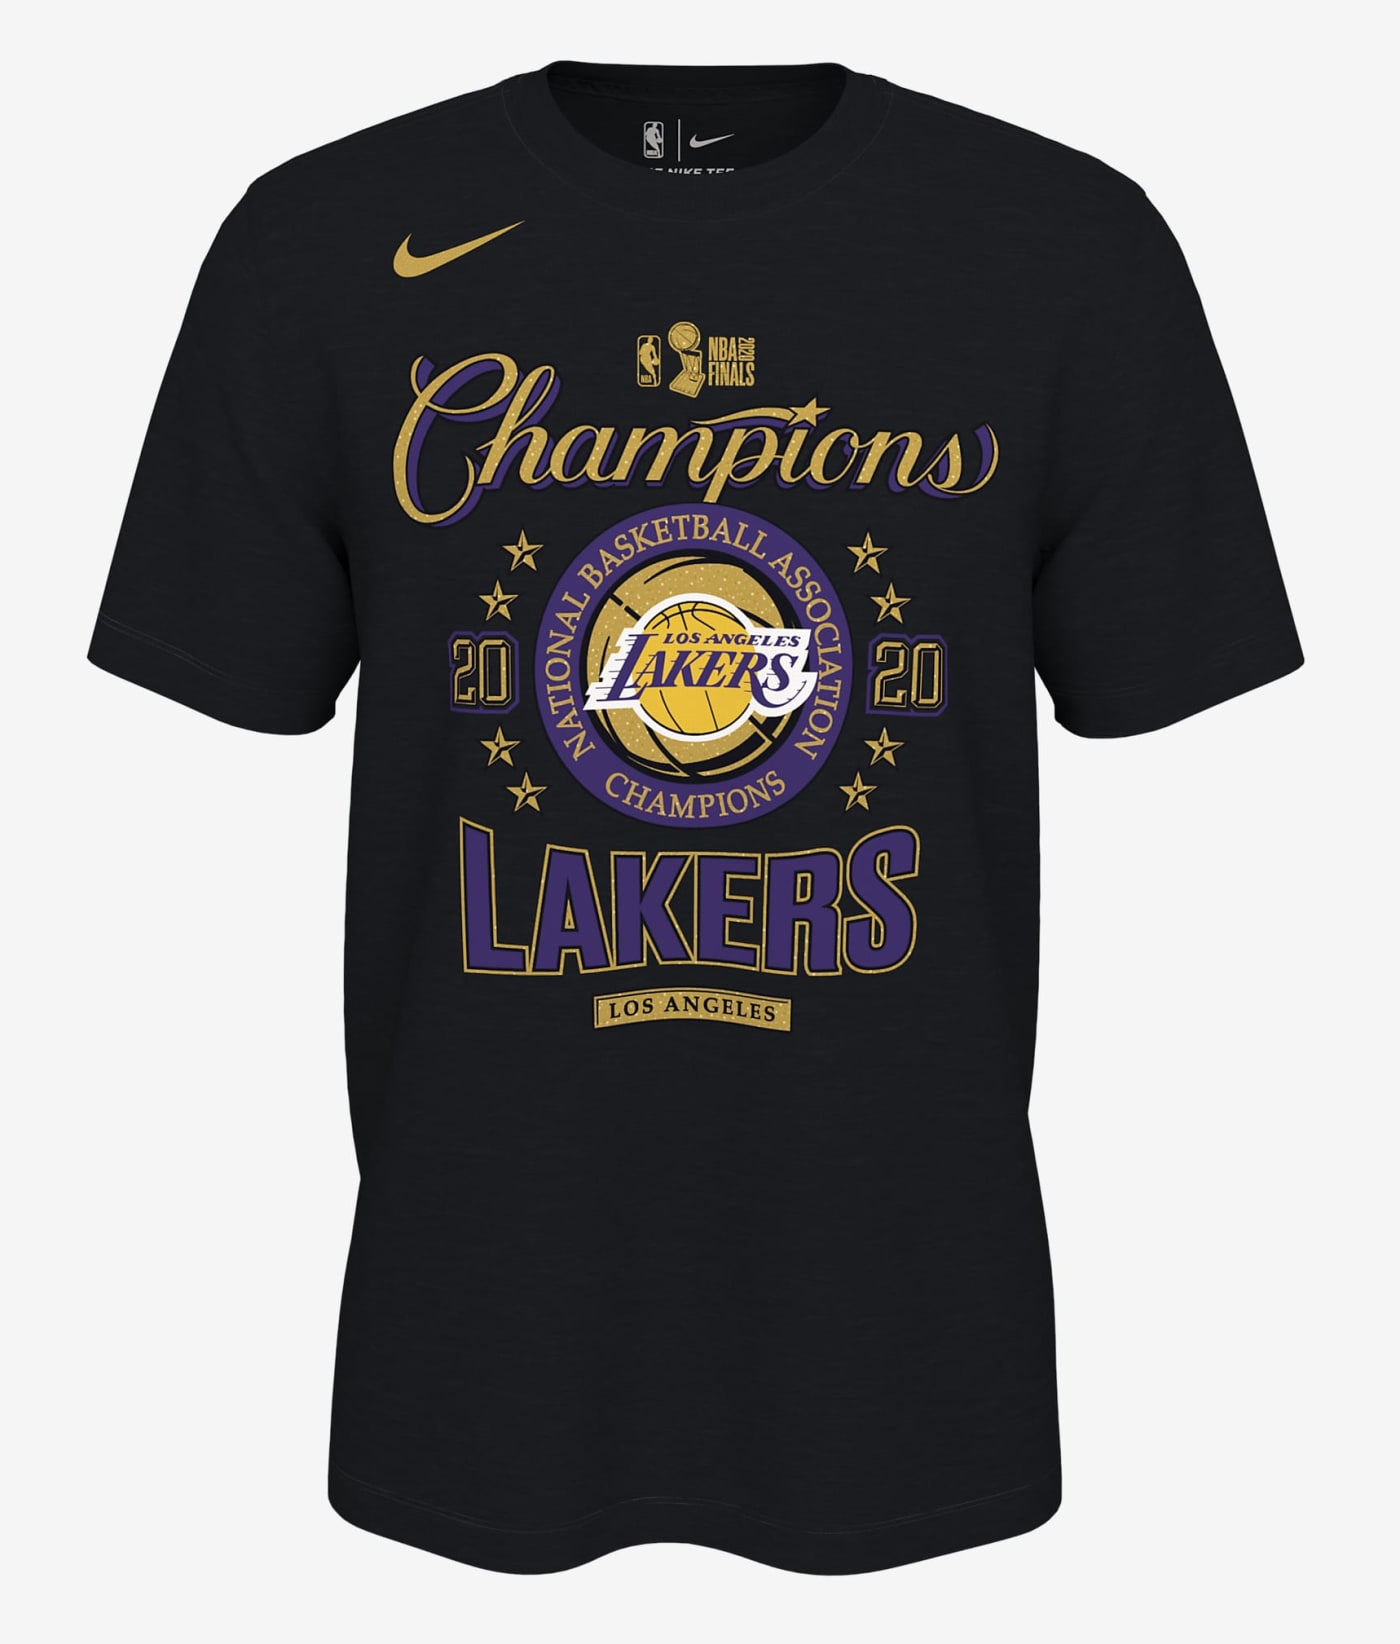 Basketball Training Sweat,Youth Students Training Outfits Fan Gift Z//A Lakers 2020 Championship Basketball Hooded Sweatshirt,Sports Clothing Pullover